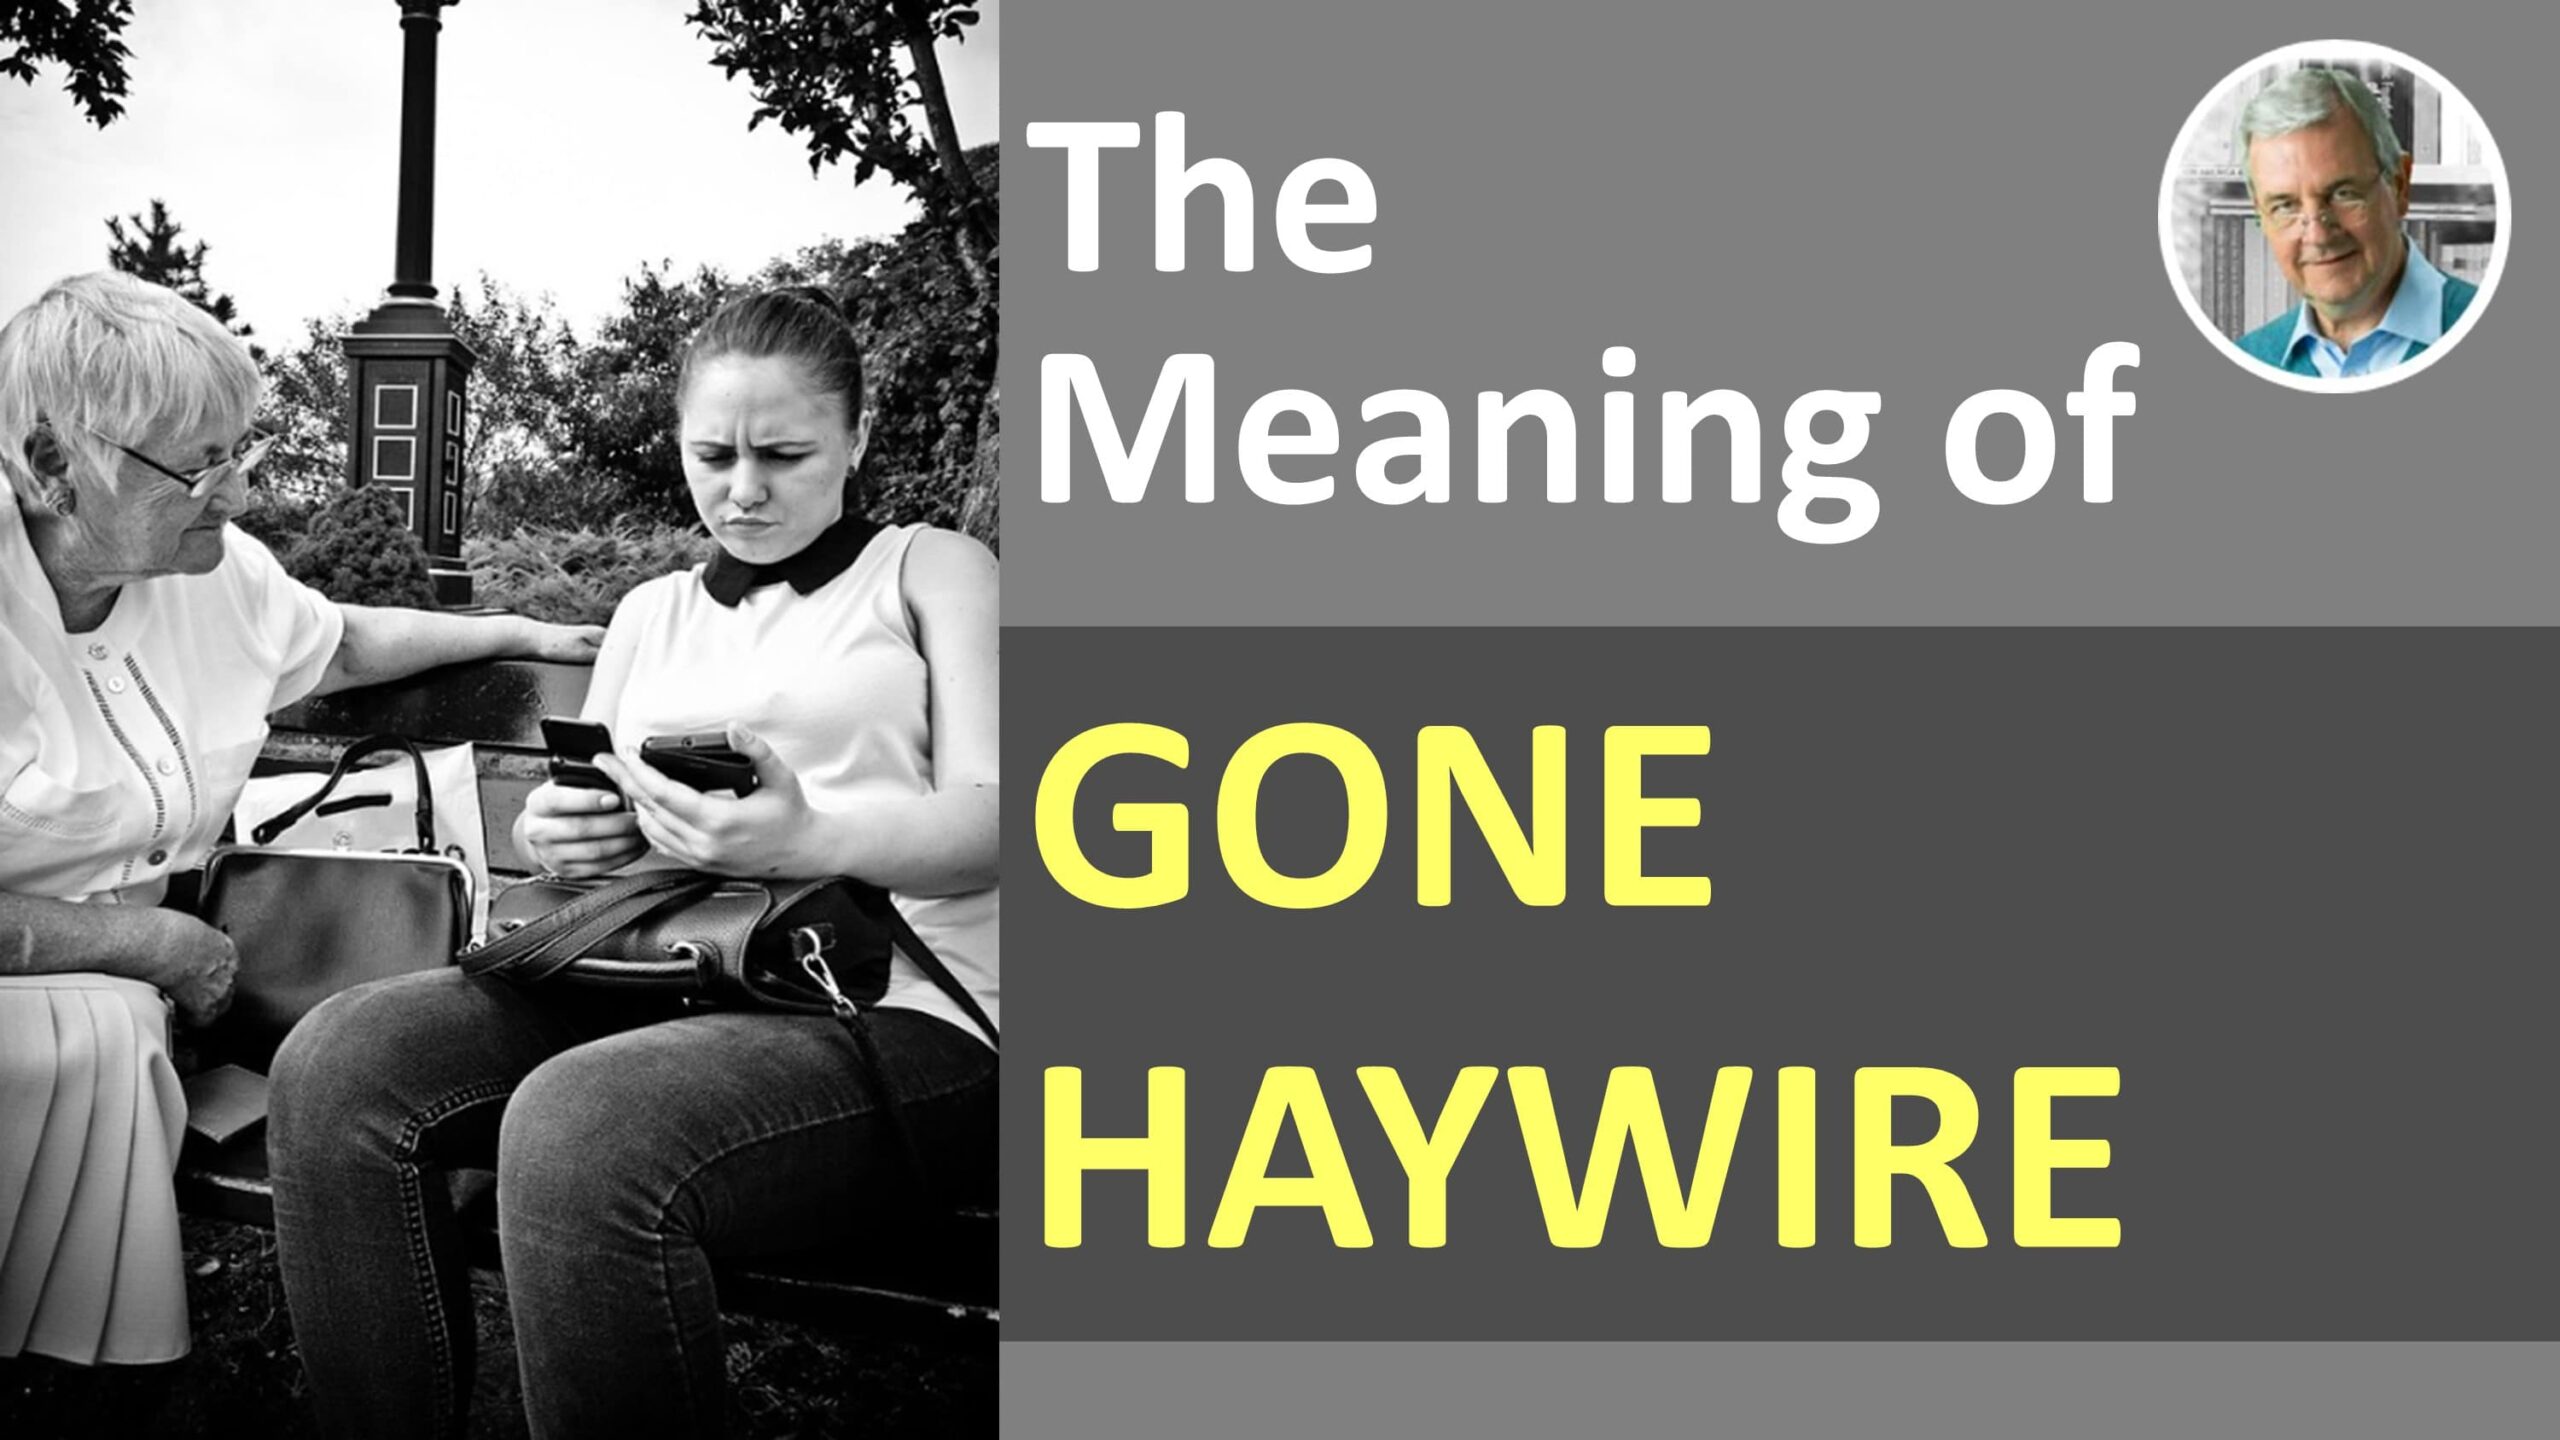 definition of haywire - haywire in a sentence